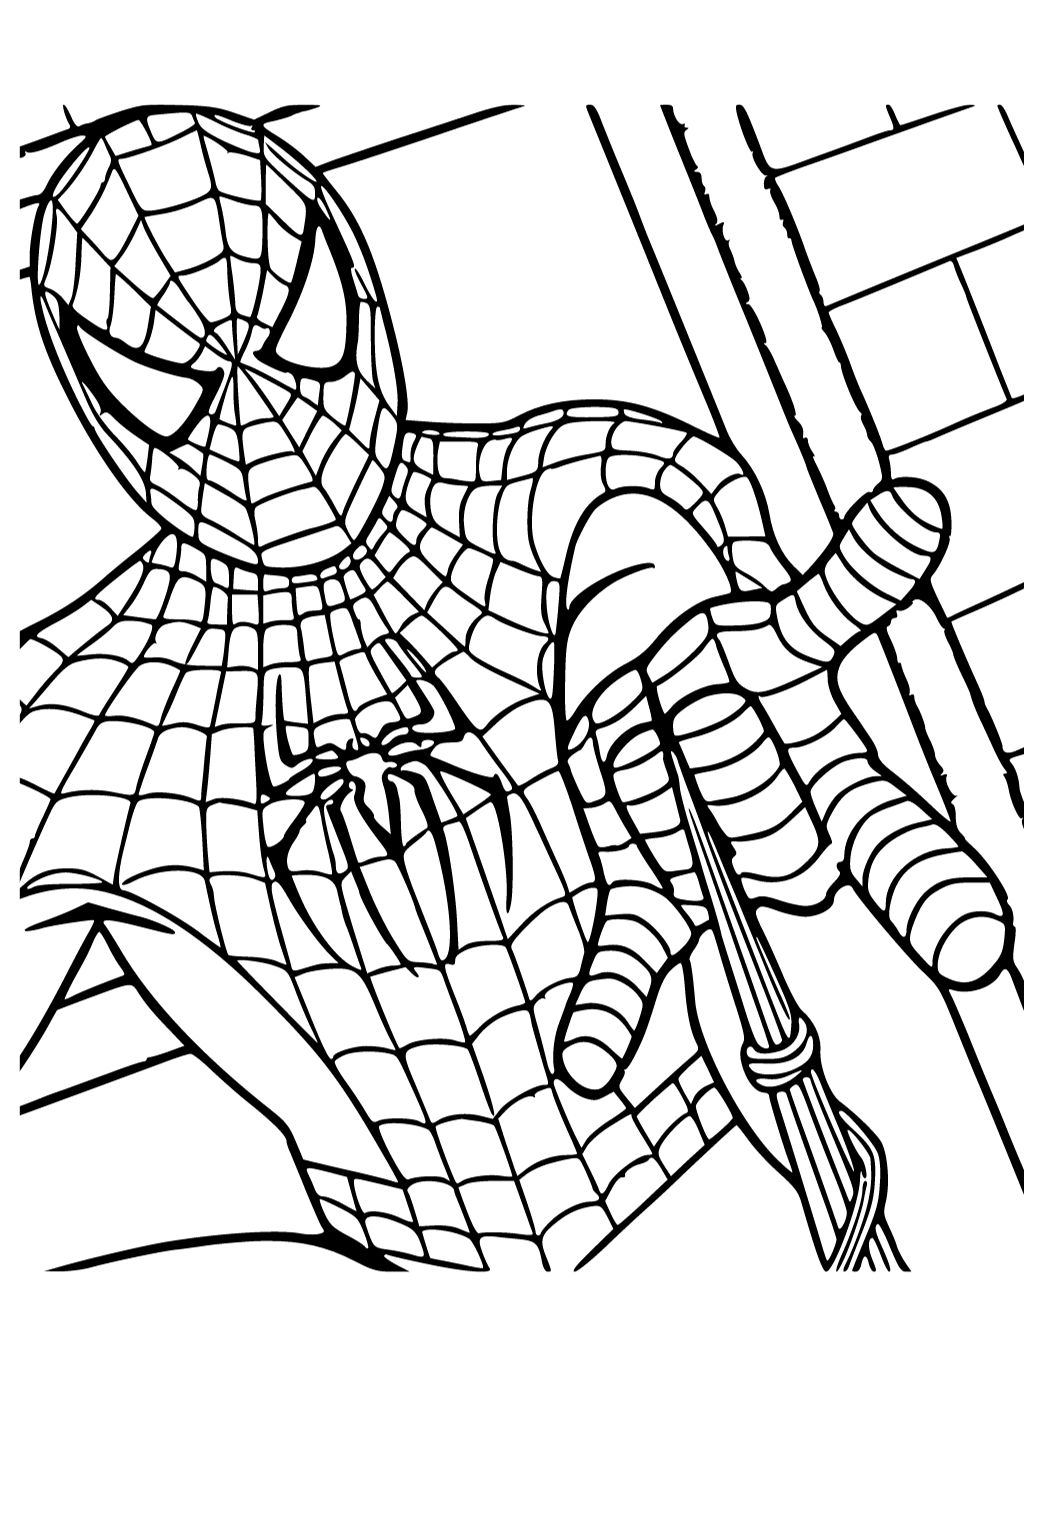 Free printable spiderman cobweb coloring page for adults and kids